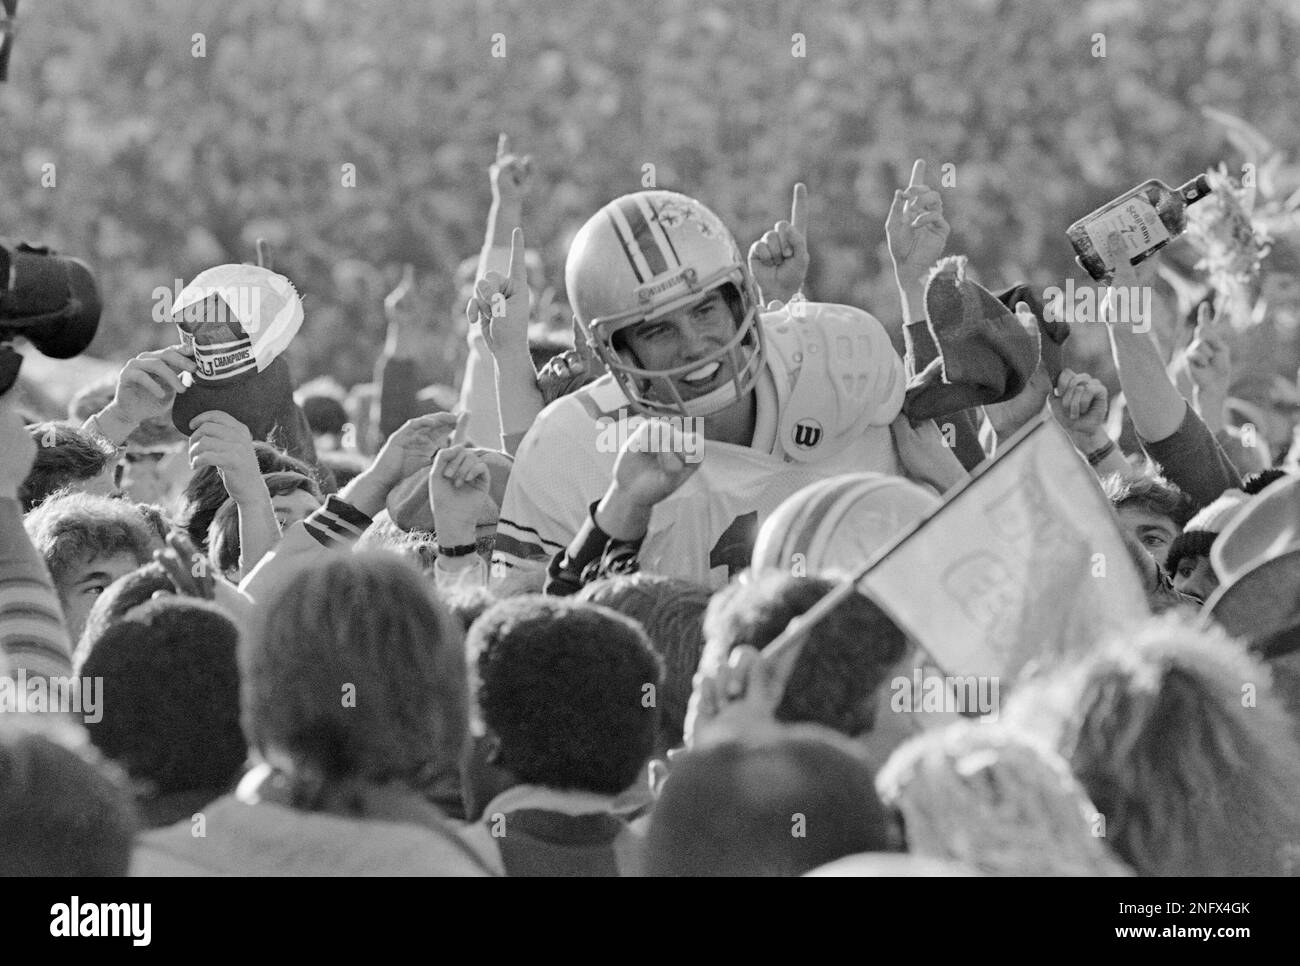 Ohio State University quarterback Art Schlichter got a victory ride by  teammates and fans on Saturday, Nov 19, 1979 in Ann Arbor after 18-15 win  over Michigan. The Buckeyes came from behind